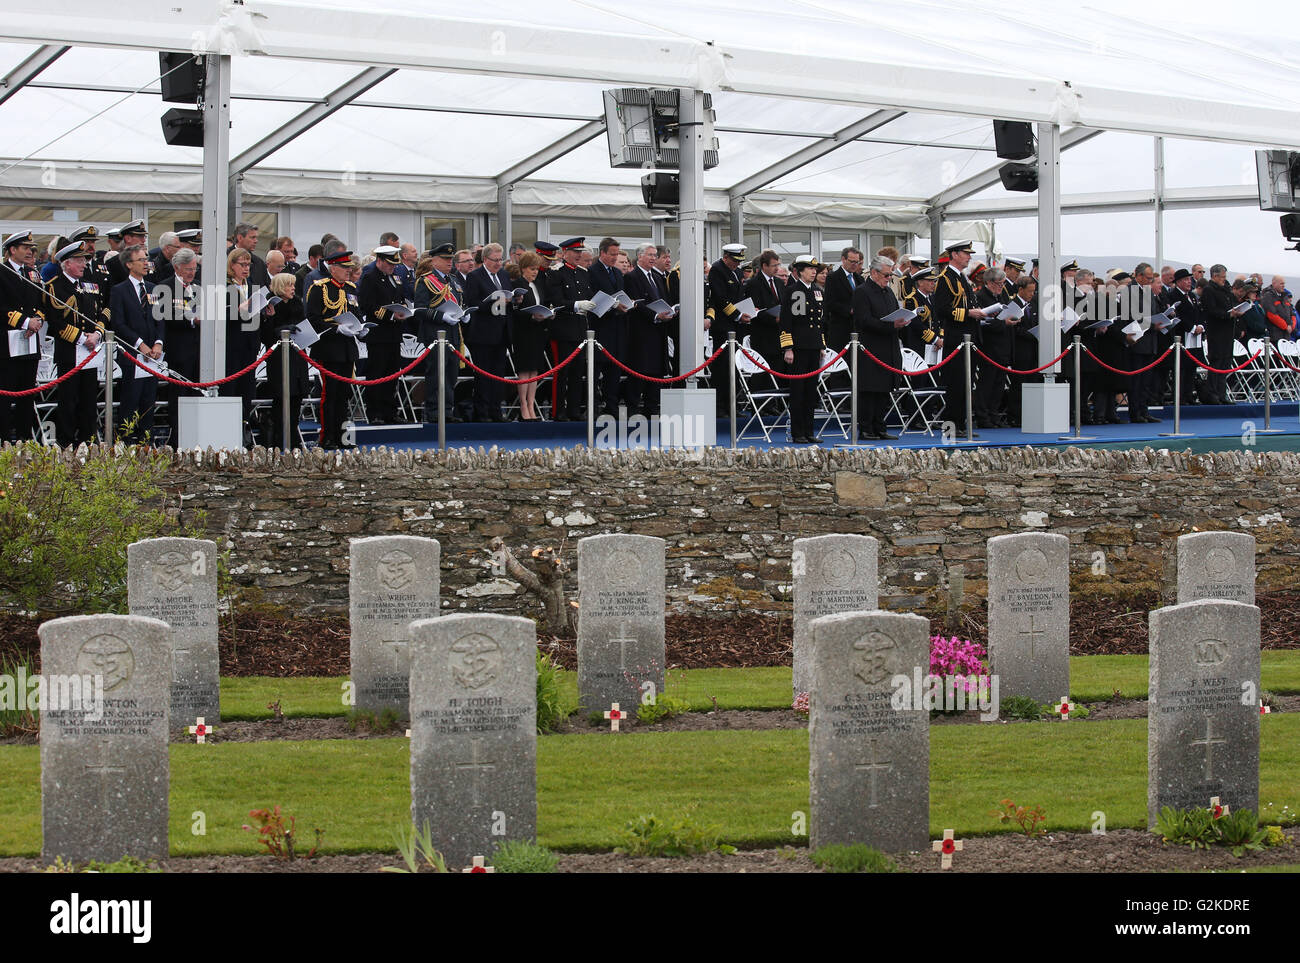 Dignitaries attend a service at Lyness Cemetery on the island of Hoy, Orkney, to mark the centenary of the Battle of Jutland. Stock Photo